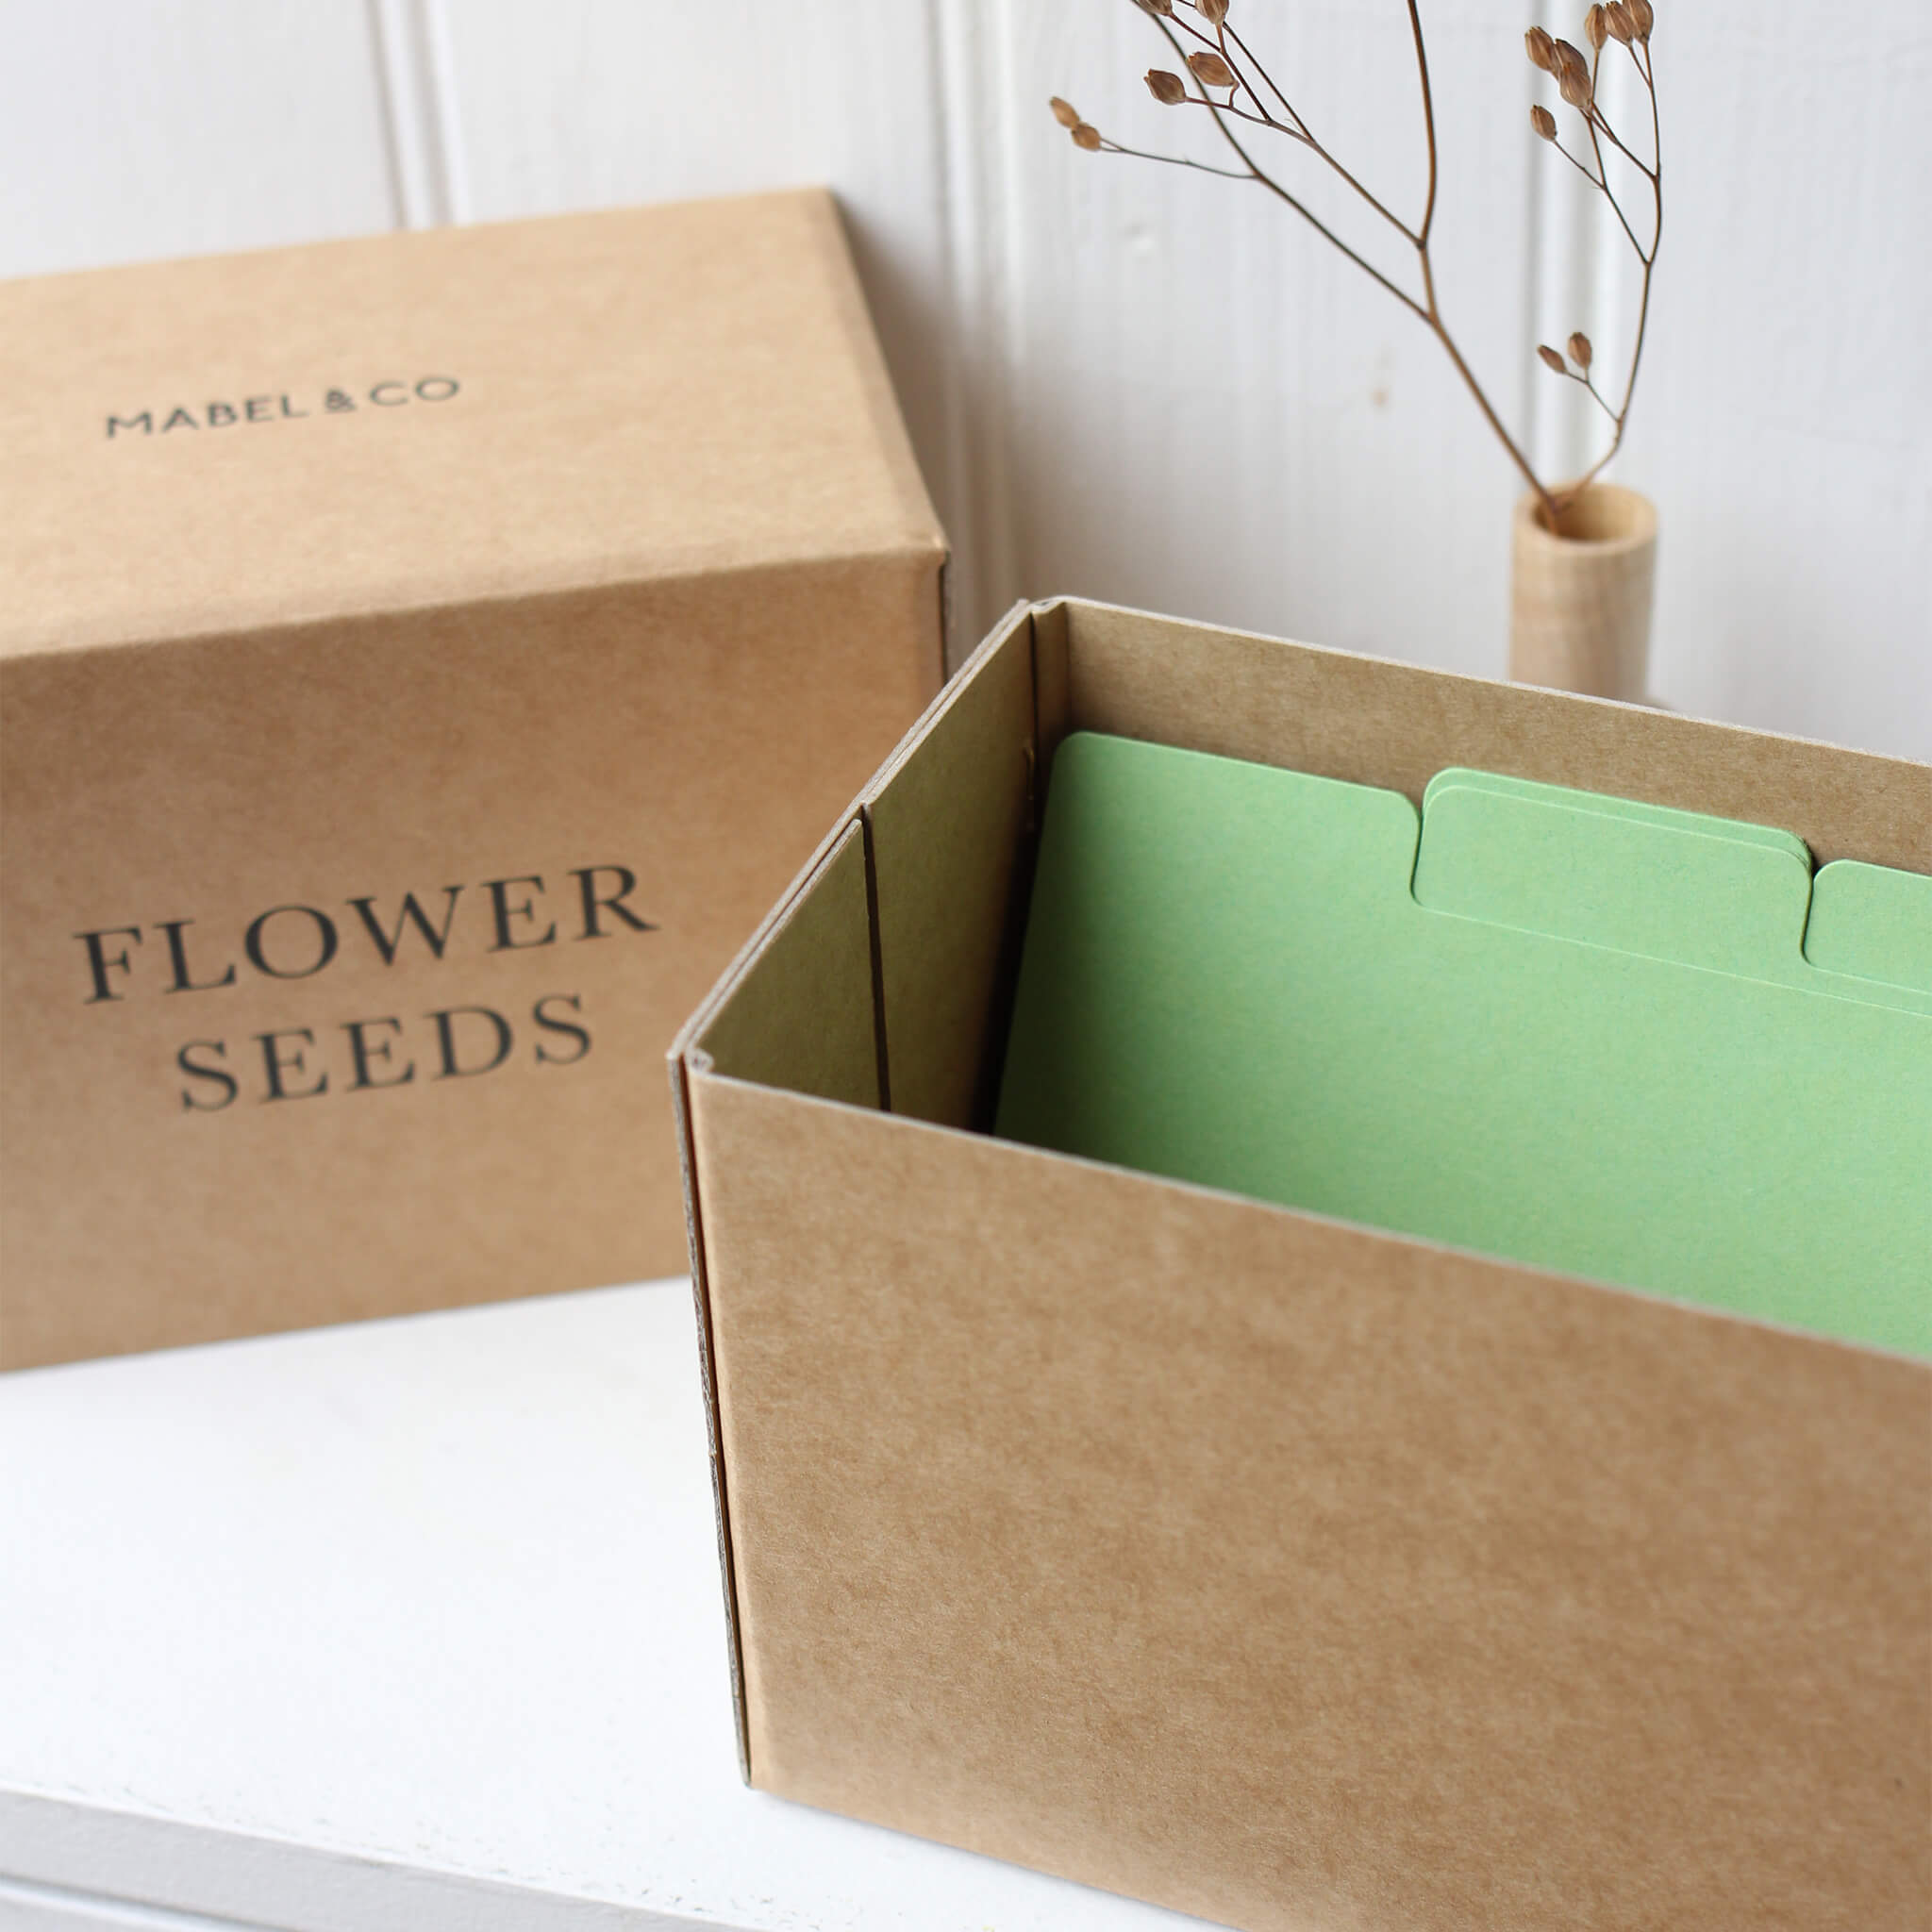 MABEL AND CO Letterpress Printed Seed Box - Flowers